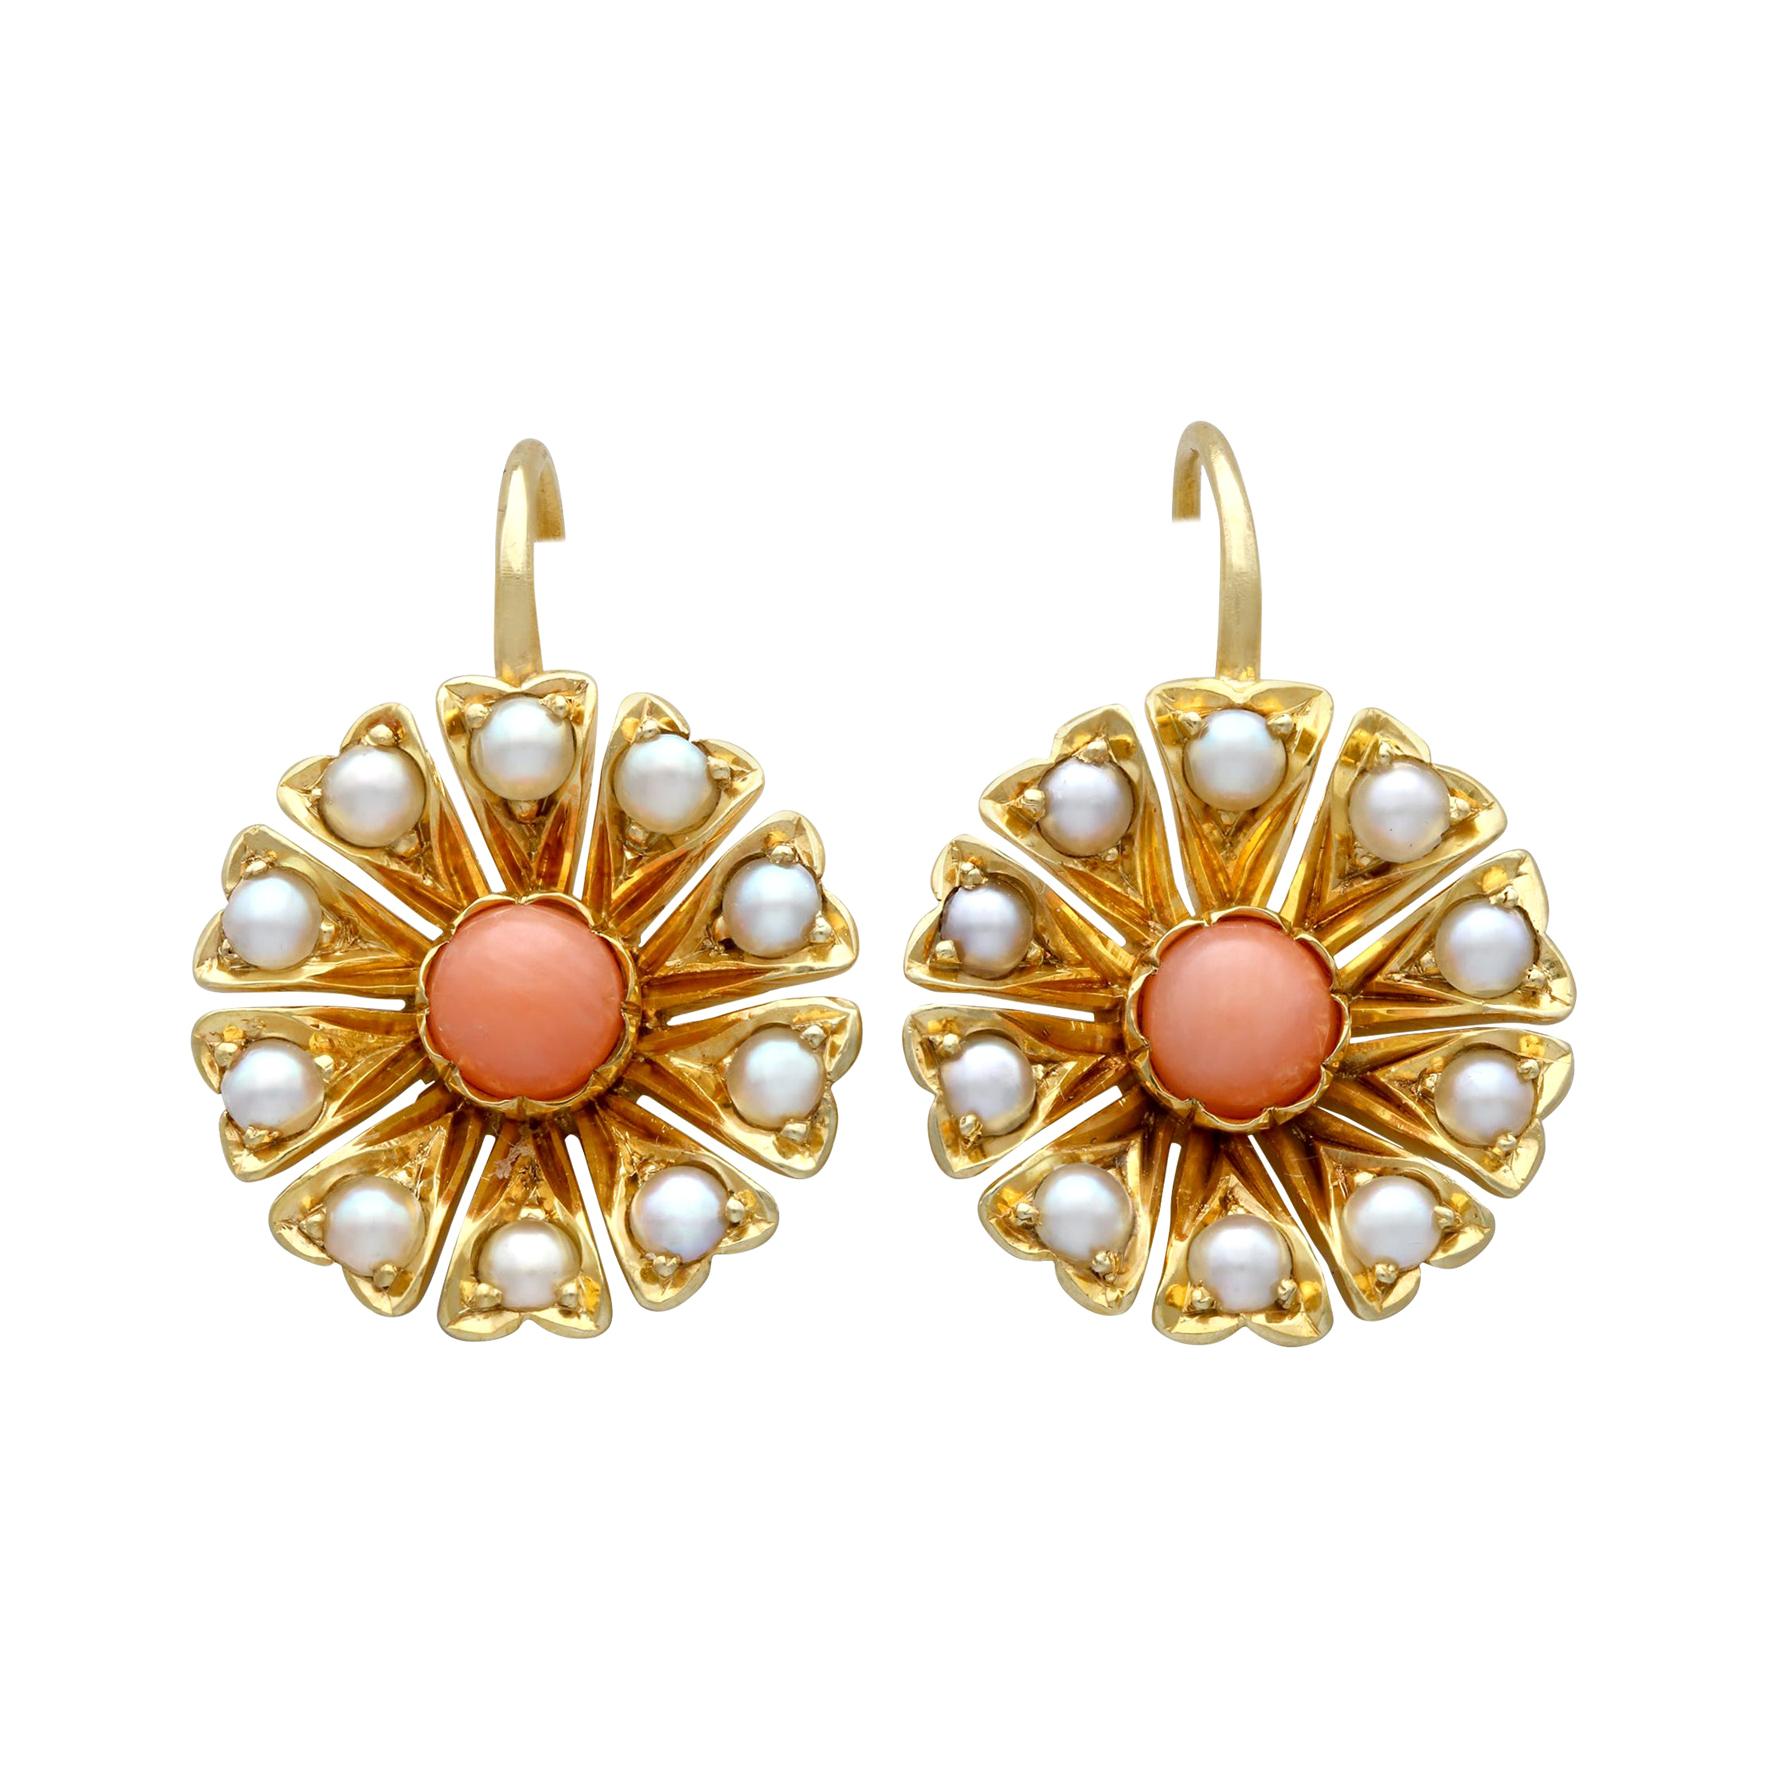 Antique Coral and Seed Pearl Yellow Gold Earrings